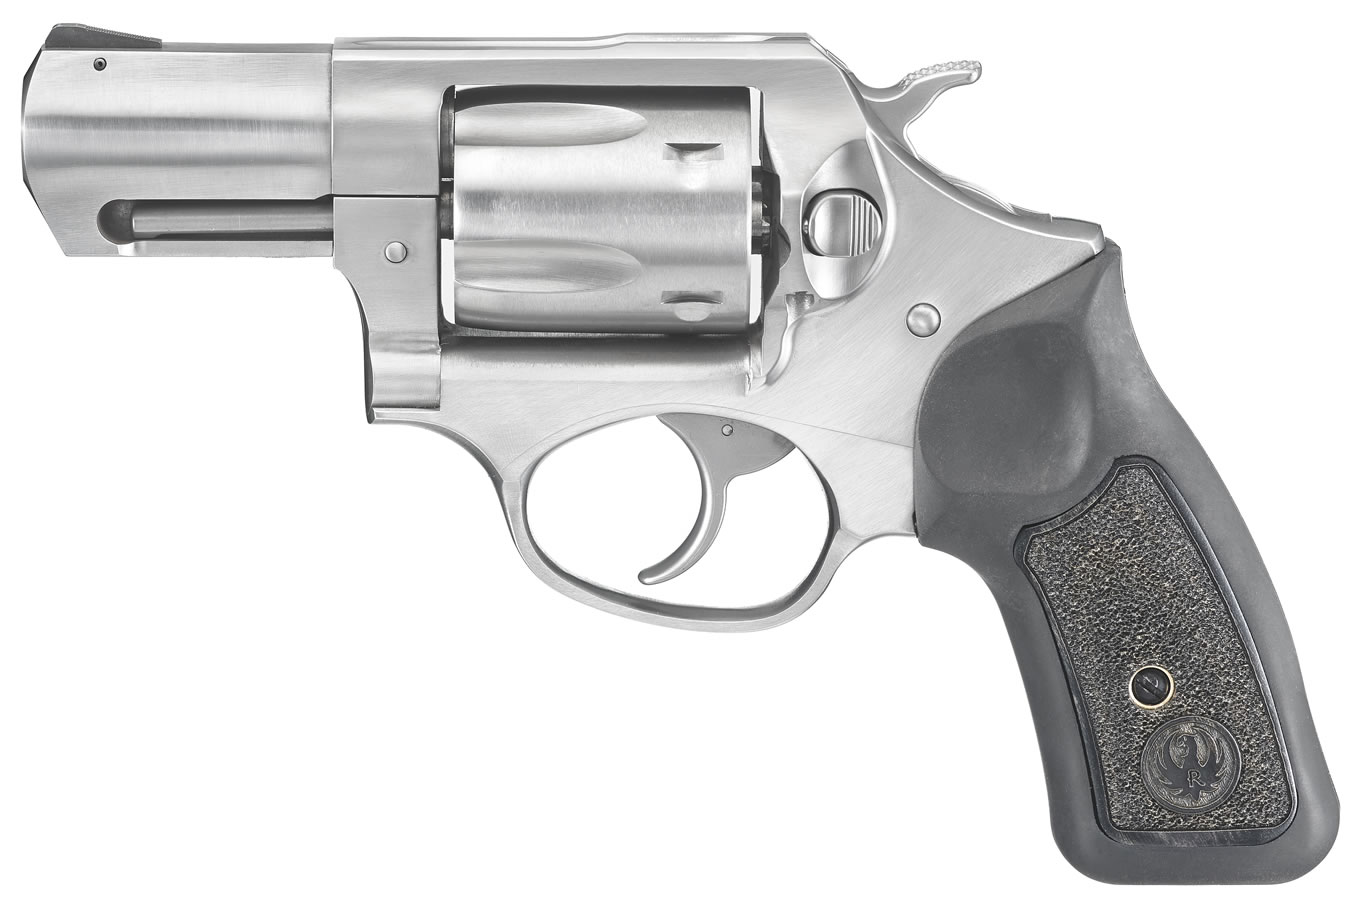 RUGER SP101 357 MAGNUM DOUBLE-ACTION REVOLVER